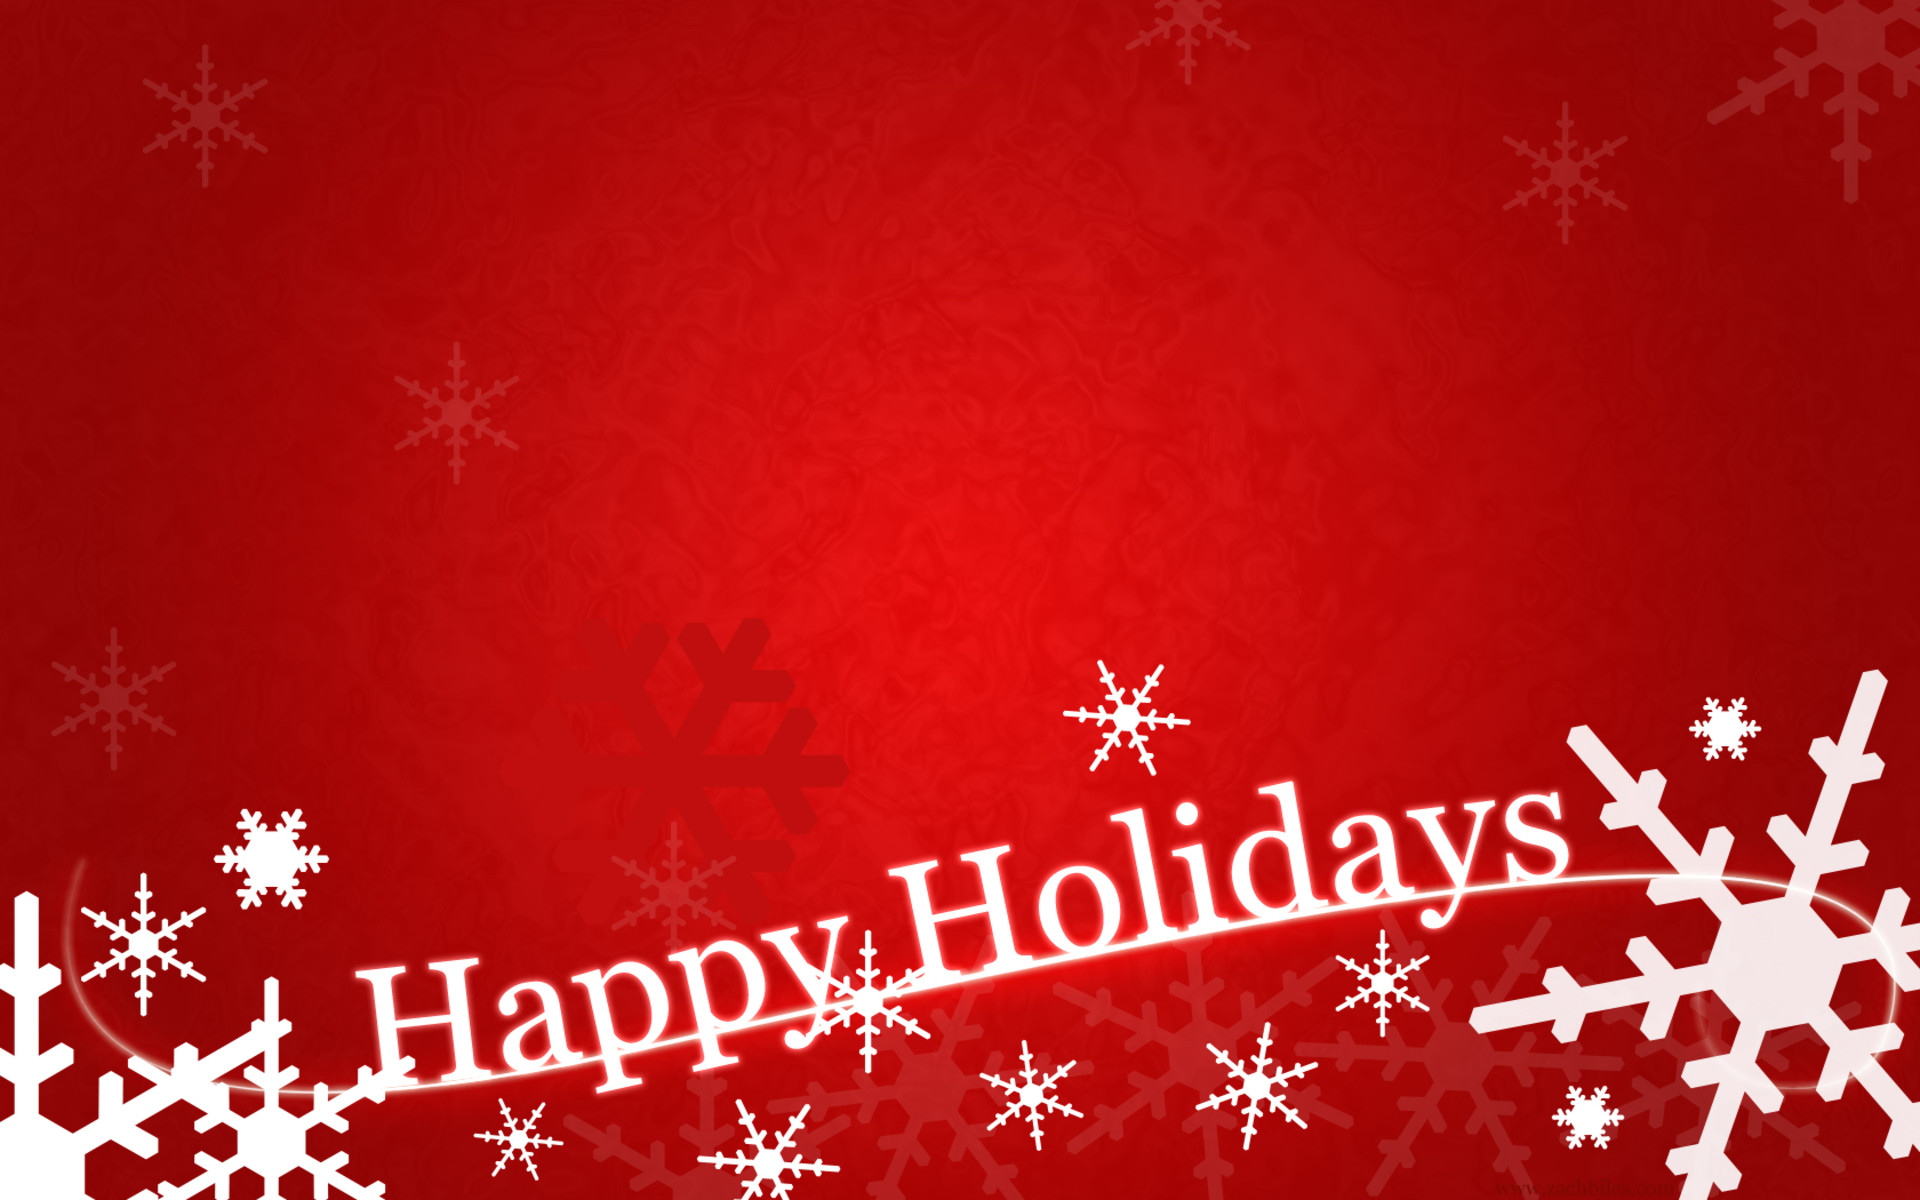 red holiday backgrounds